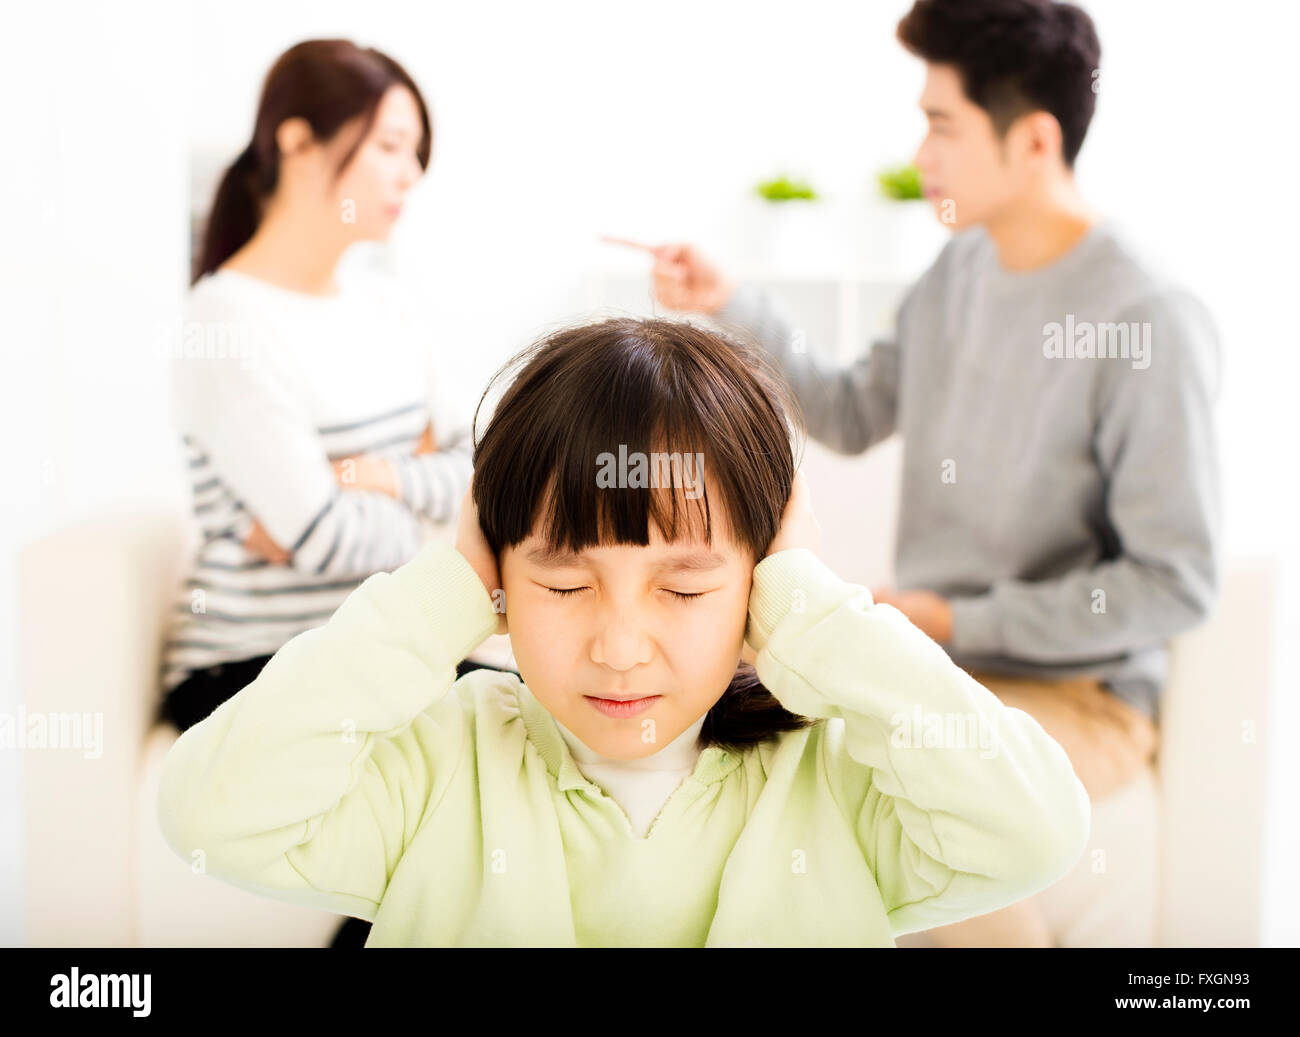 Parents fighting and little girl being upset Stock Photo